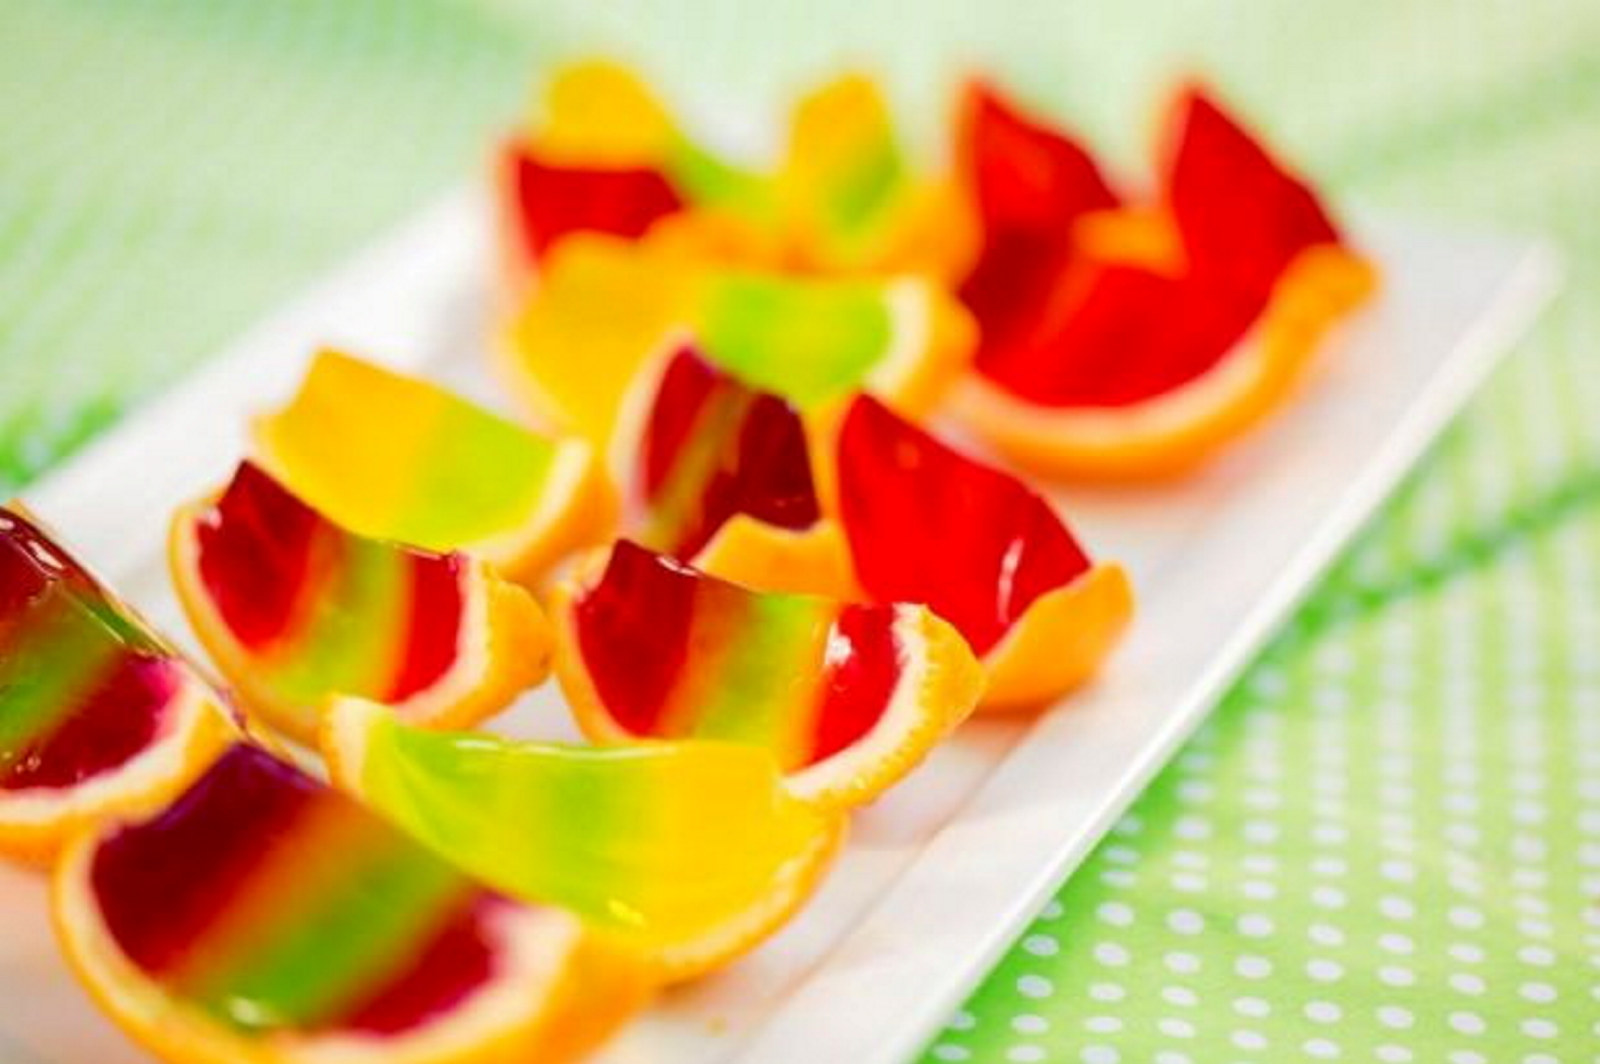 Sliced oranges filled with multicoloured layers of jelly.